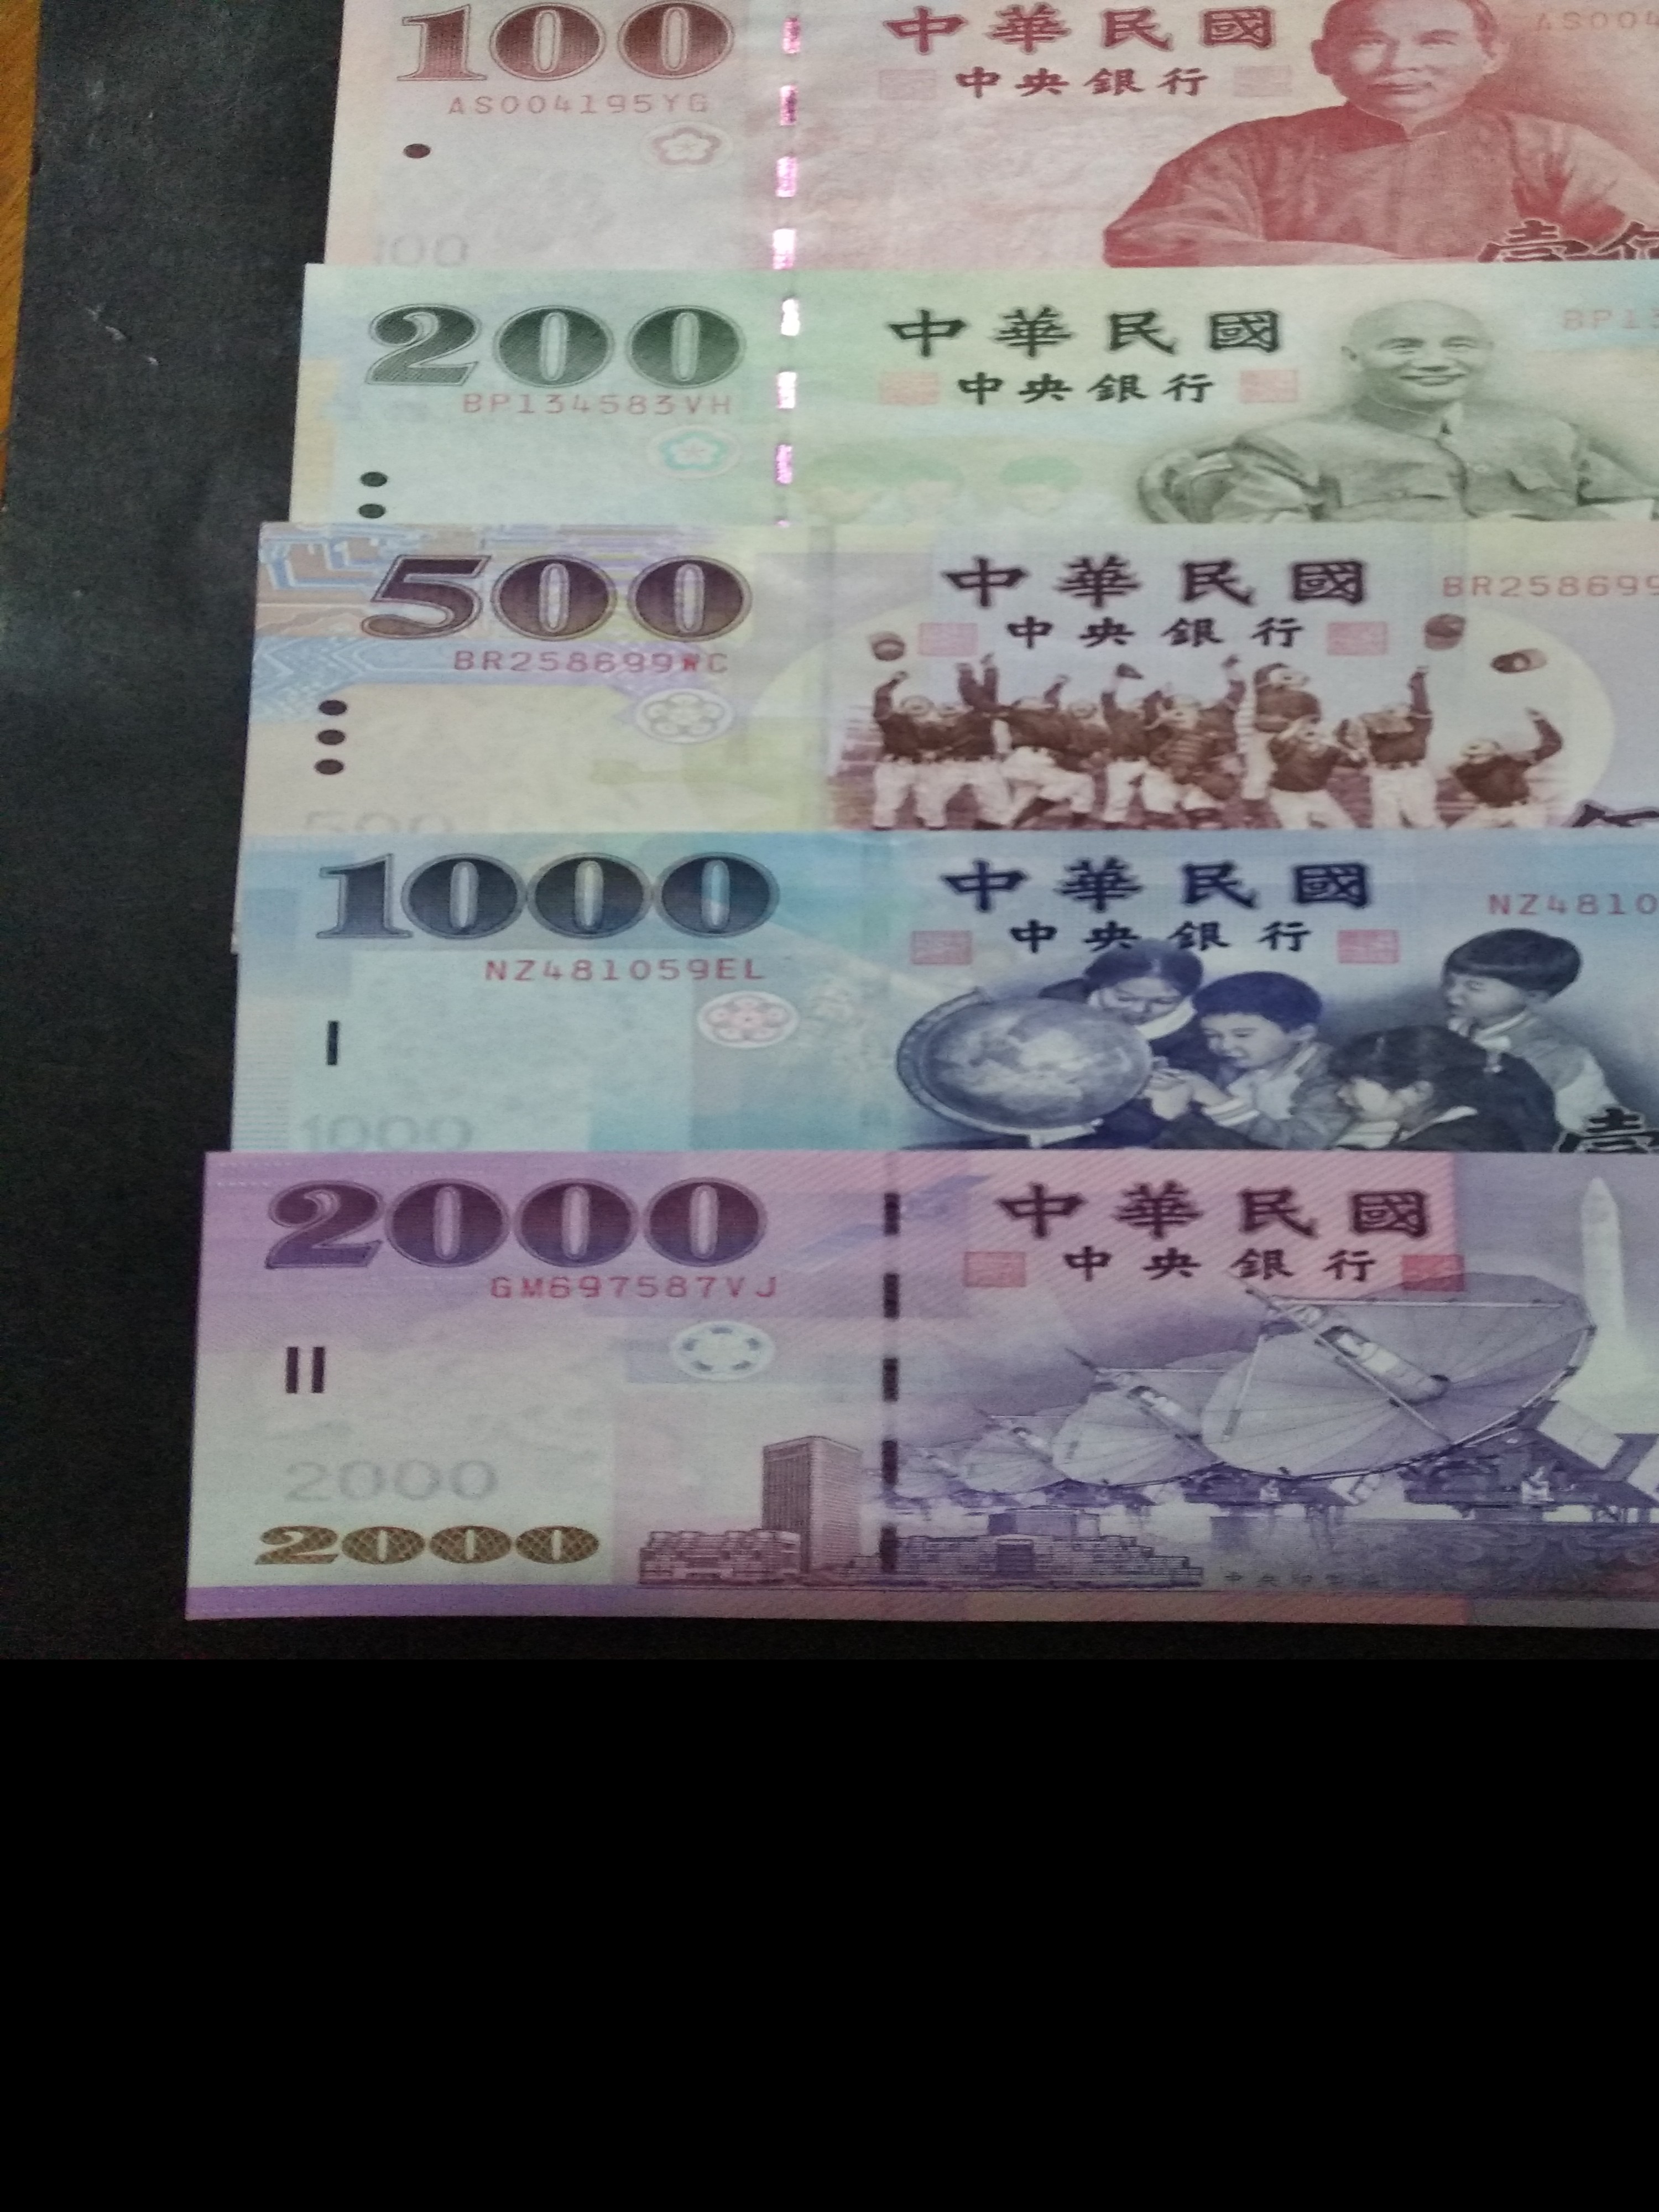 Taiwan banknotes, Hobbies & Toys, Memorabilia & Collectibles, Currency ...